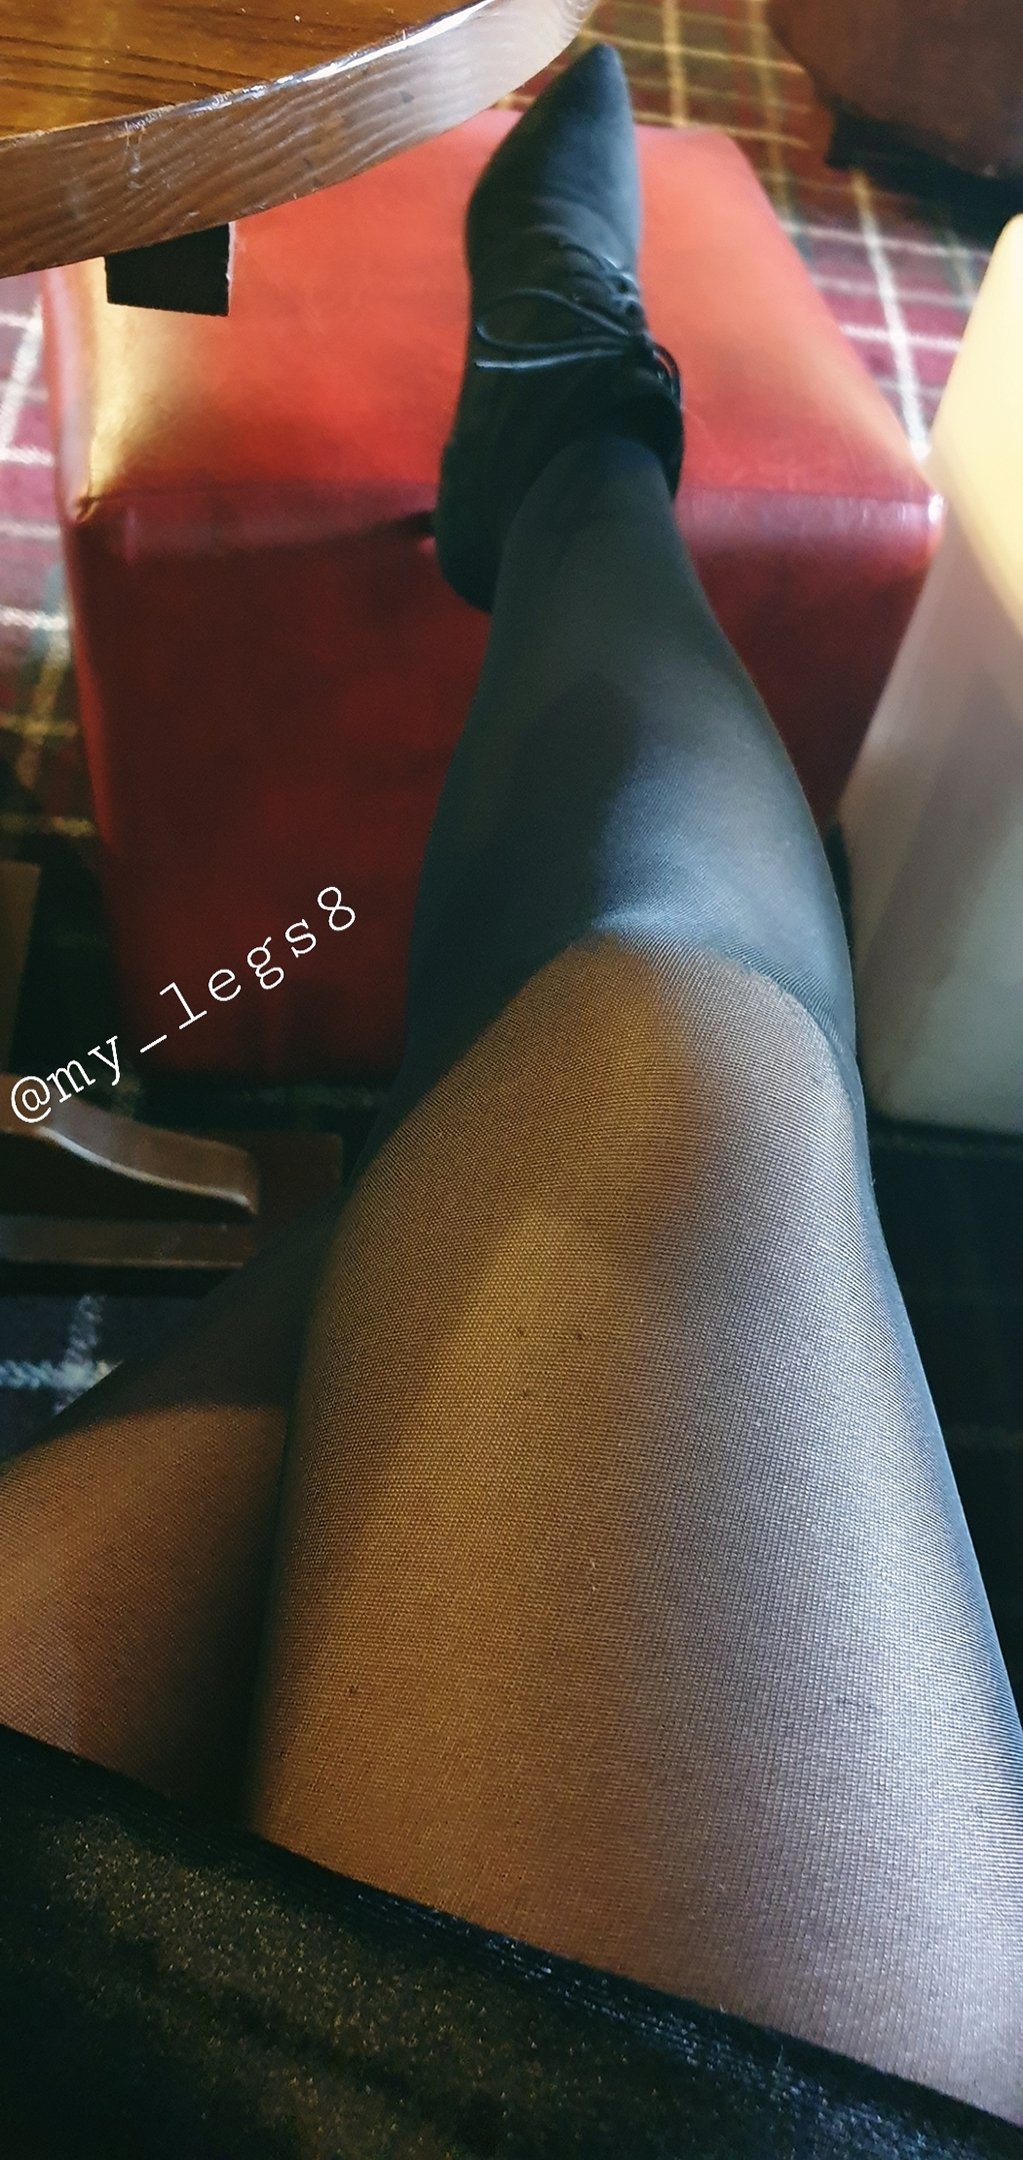 Pandora B 👠🇬🇧 on X: Merry Christmas my friends! Here's a quick pic in  the bar in my Wolford Synergy 40 denier tights 🙂 I hope you all had a good  one!